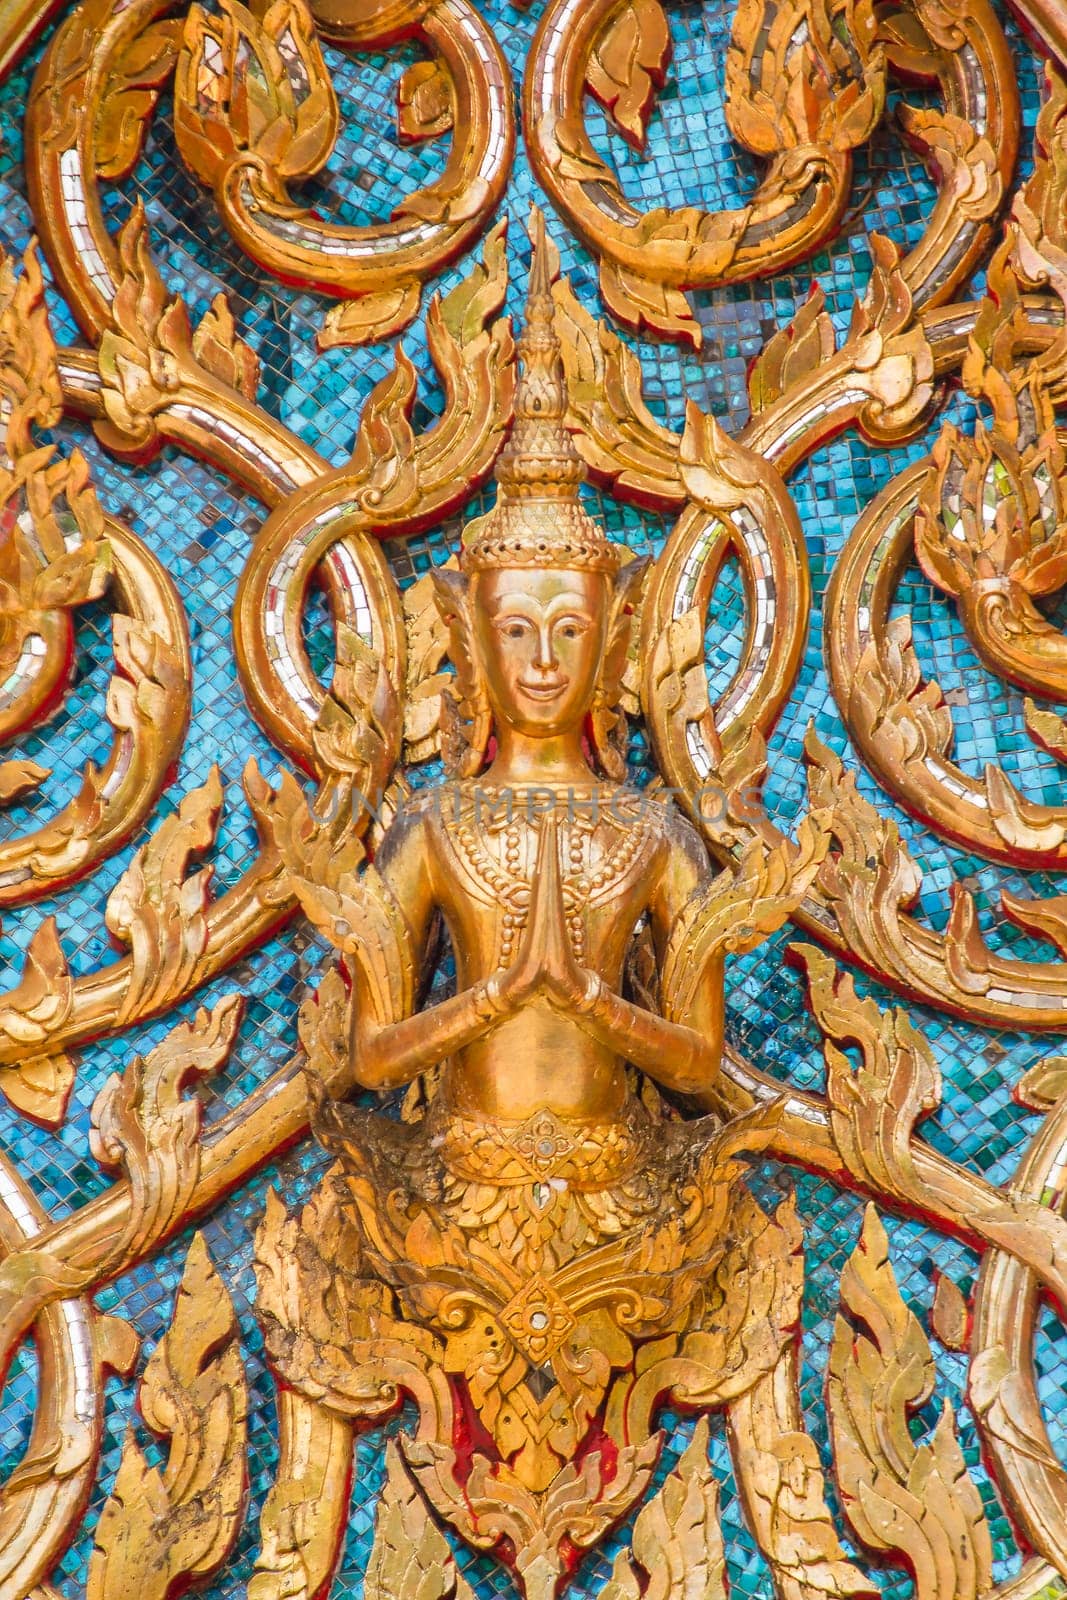 A pattern that is unique to Thailand on a temple wall.